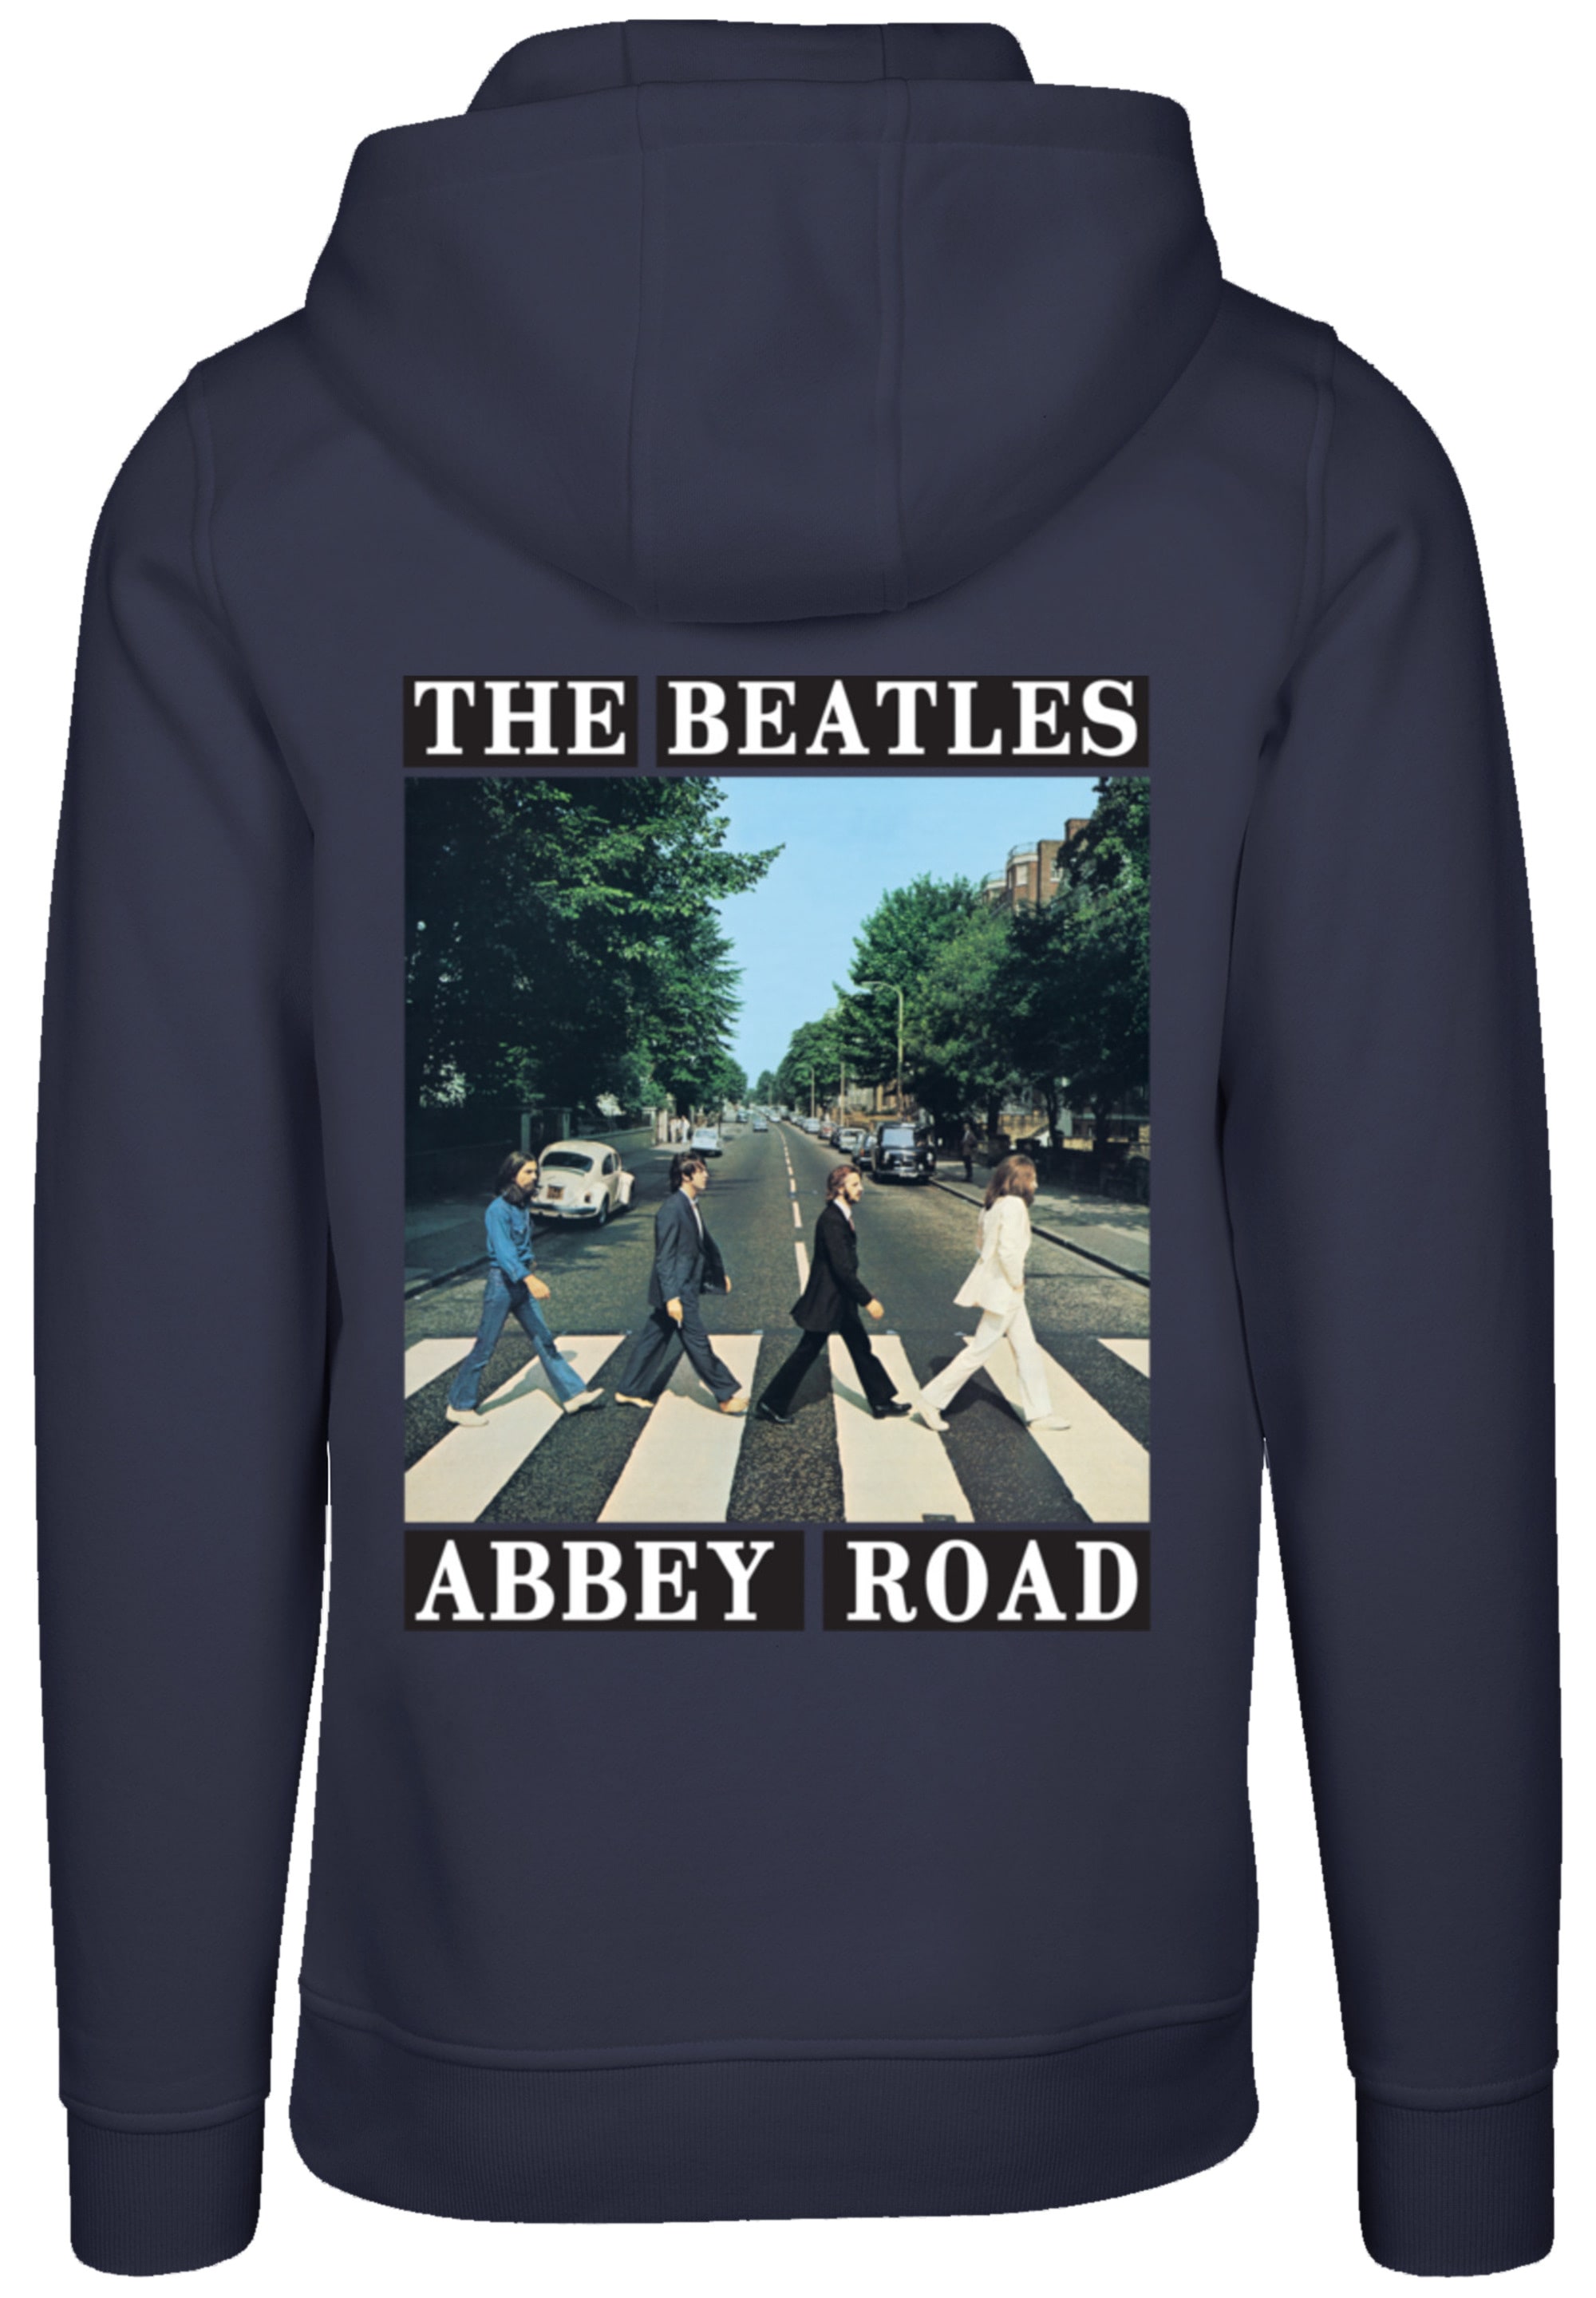 F4NT4STIC Kapuzenpullover »The Beatles Abbey Road Rock Musik Band«, Hoodie, Warm, Bequem